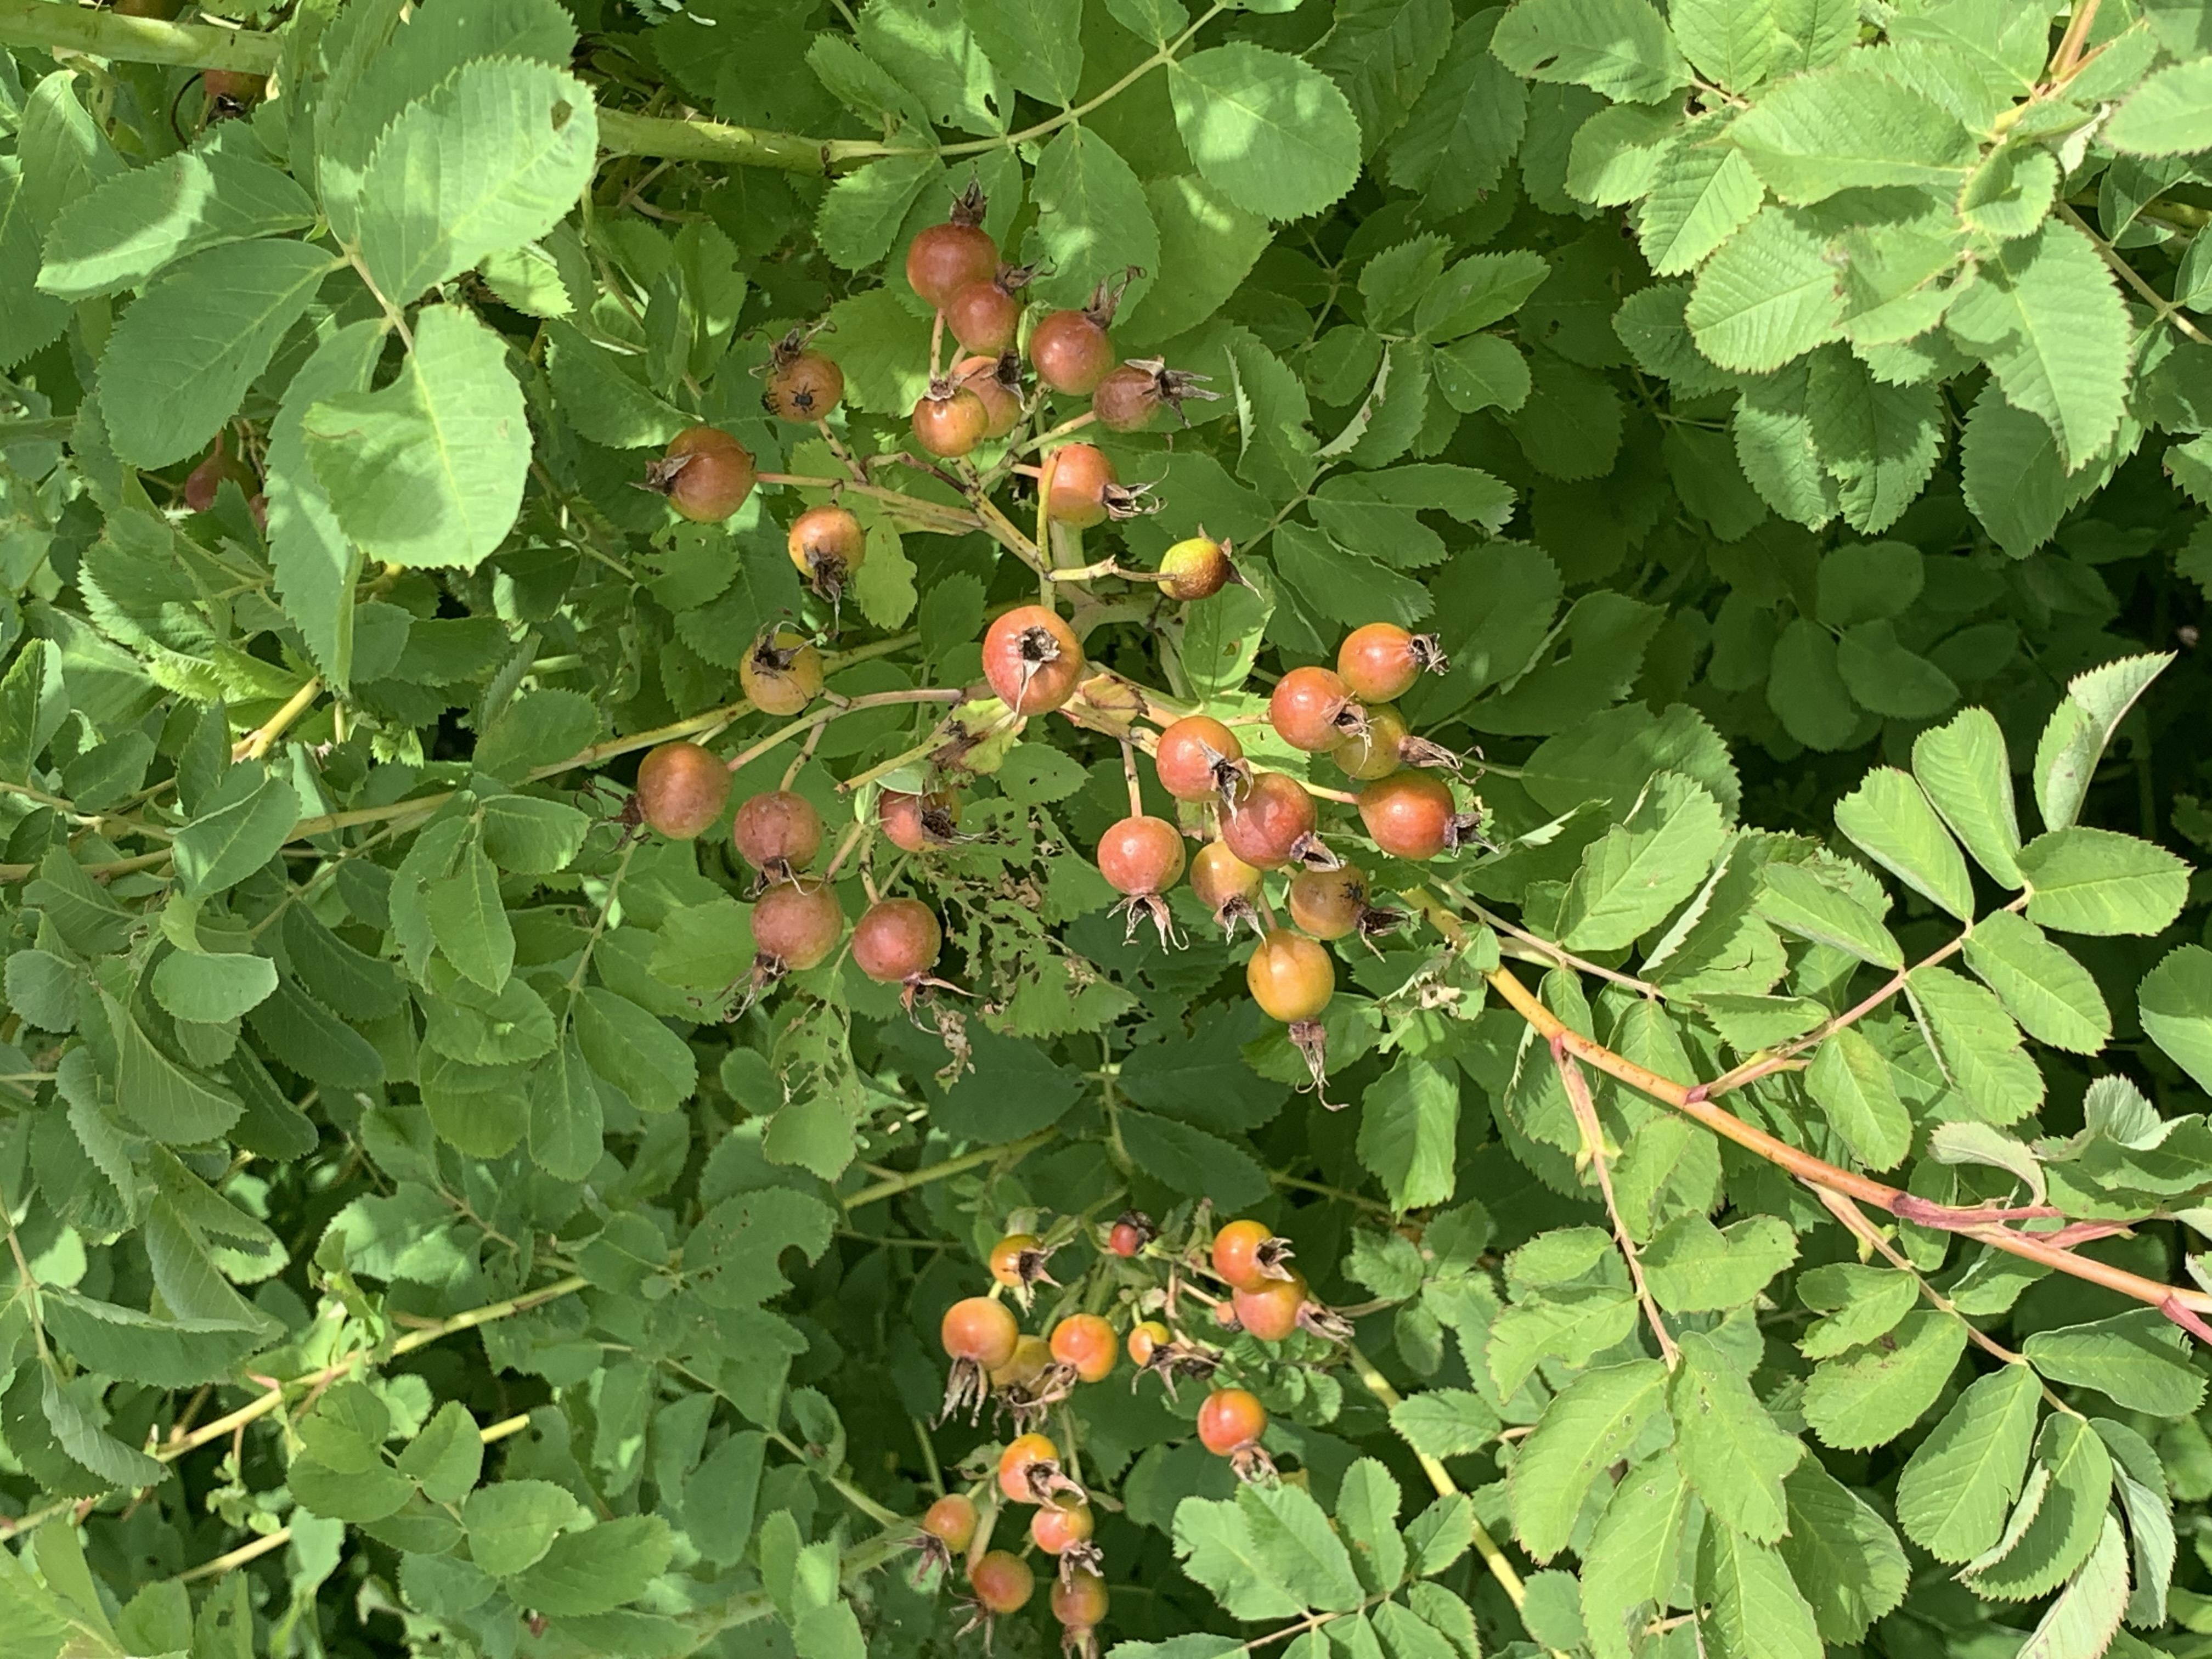 Small, light-red circular fruits with green leaves in the background